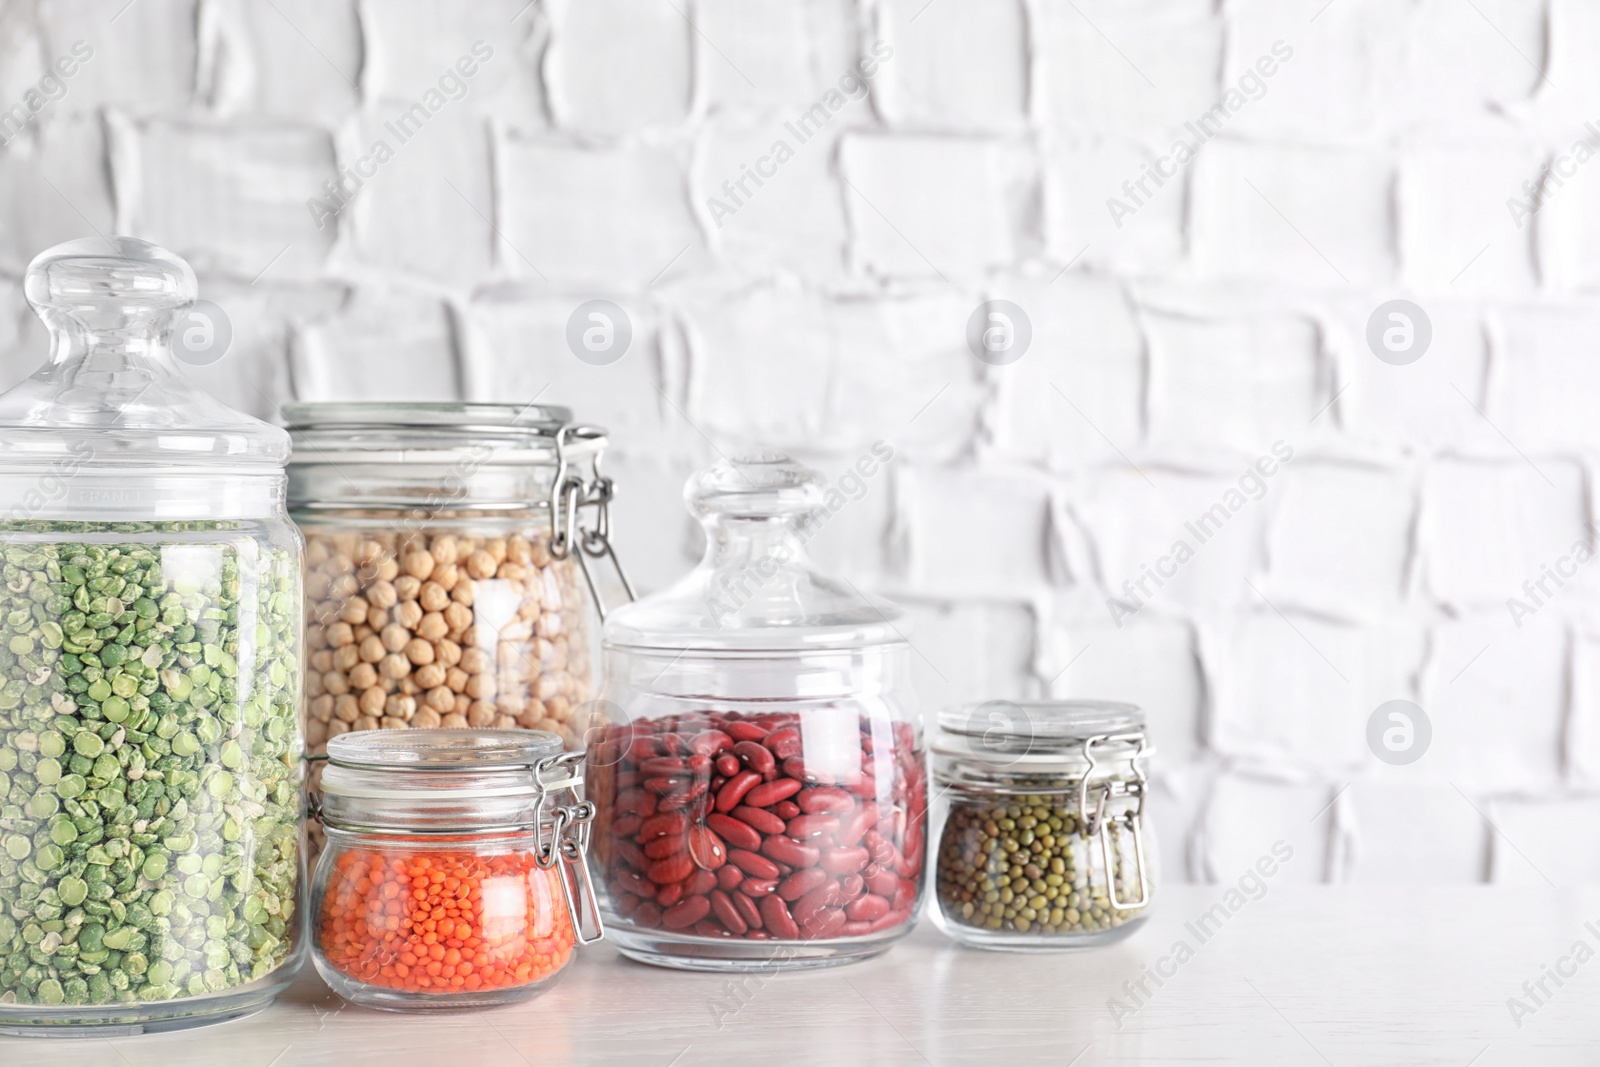 Photo of Jars with different cereals on white table against brick wall